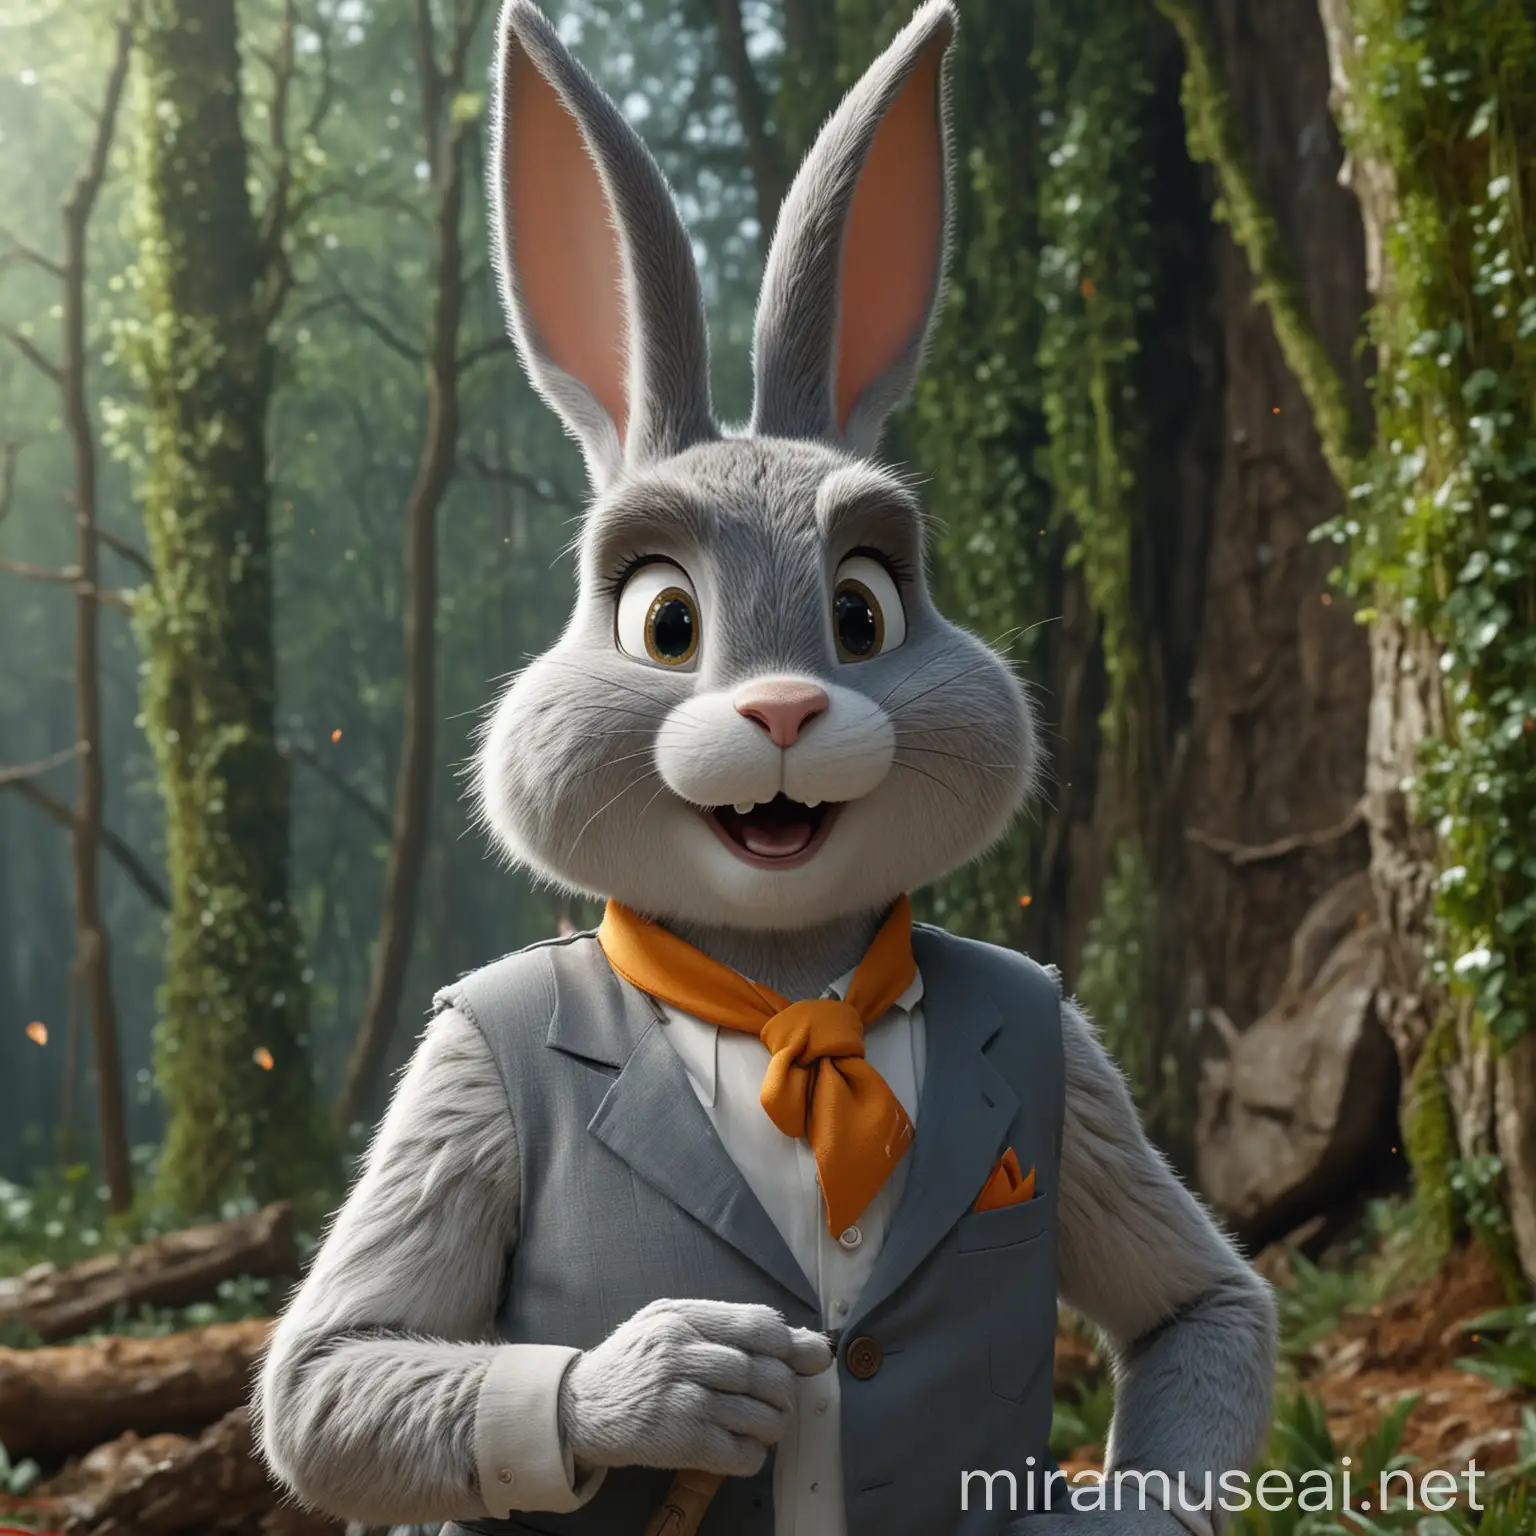 Bugs Bunny in HyperDetailed Cinematic Action Intense LiveAction Masterpiece